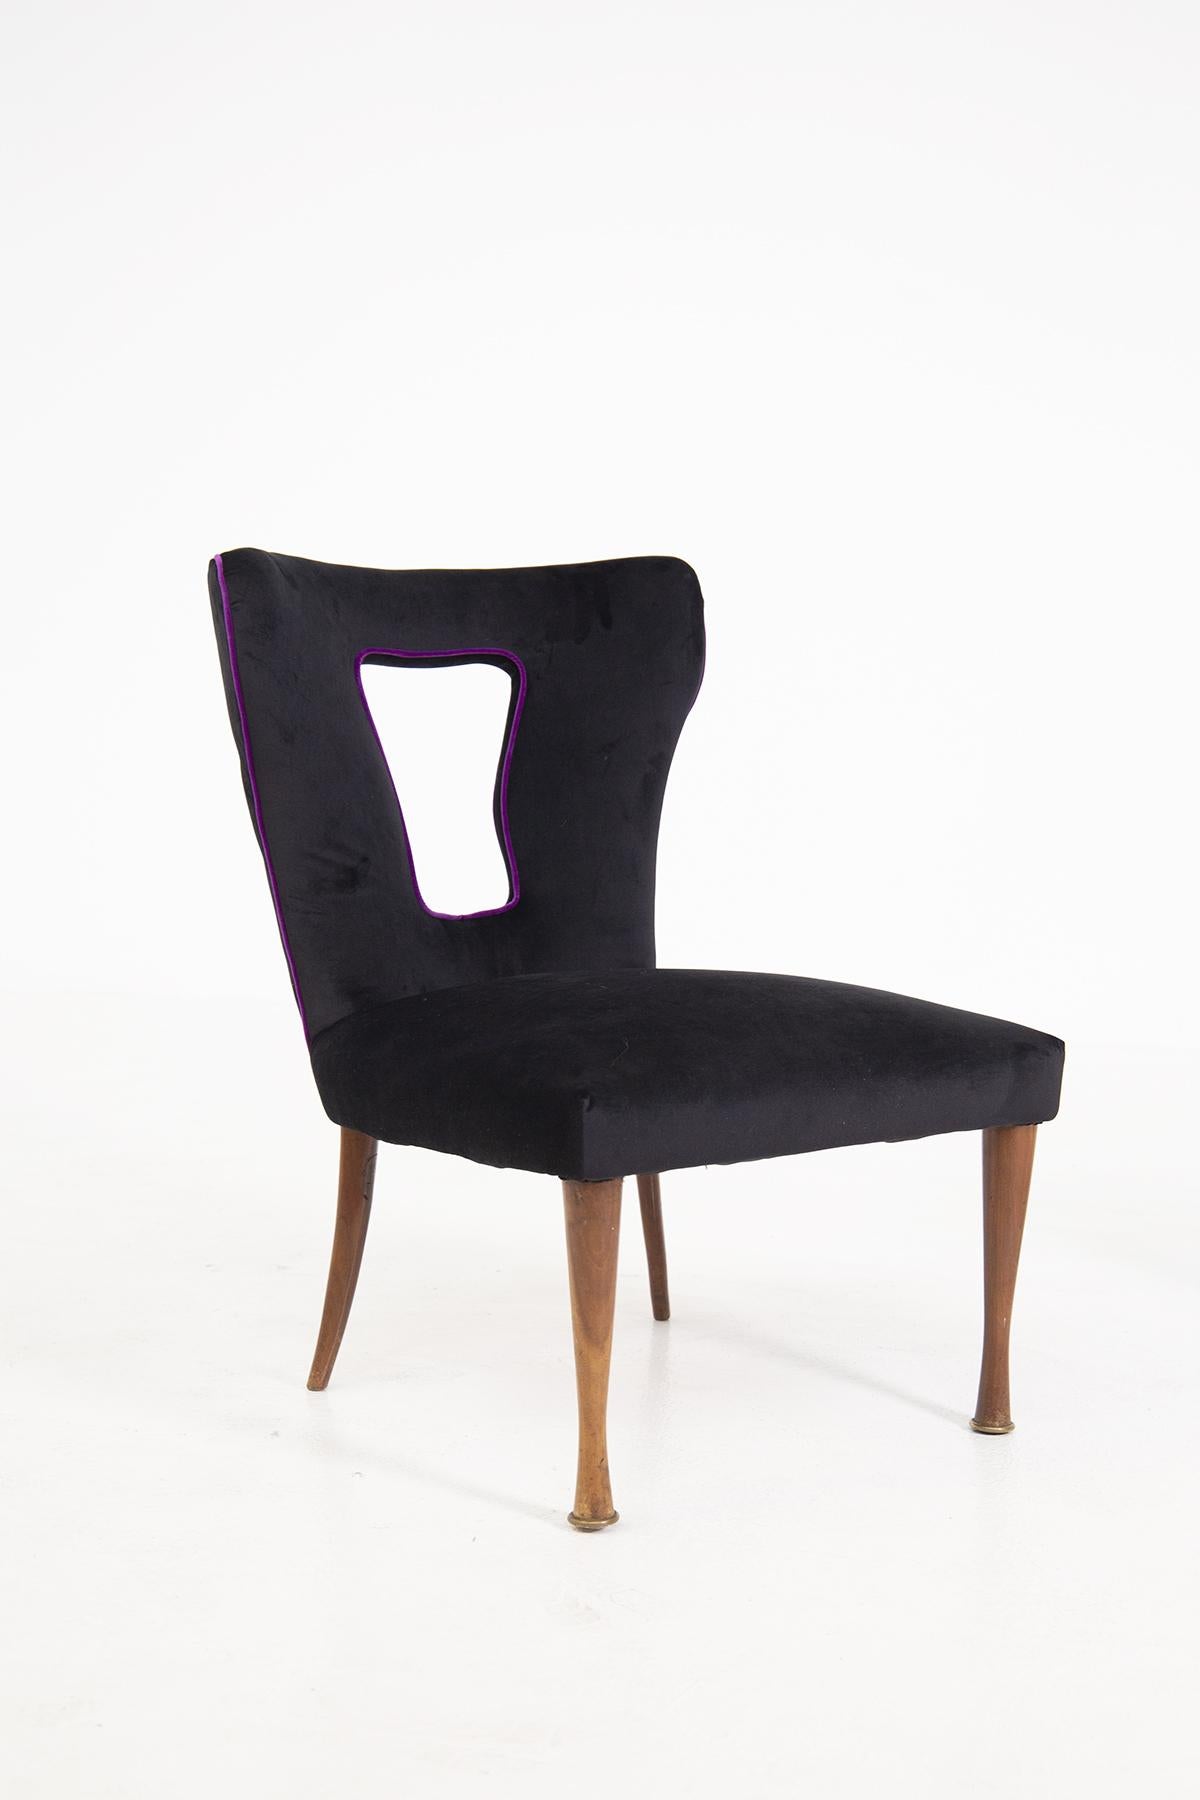 Beautiful pair of Italian armchairs from the 1950's. The pair of armchairs have been recently restored in a soft and glamorous black velvet fabric.
The feature that makes this pair very glamorous is its purple velvet border that creates a strong